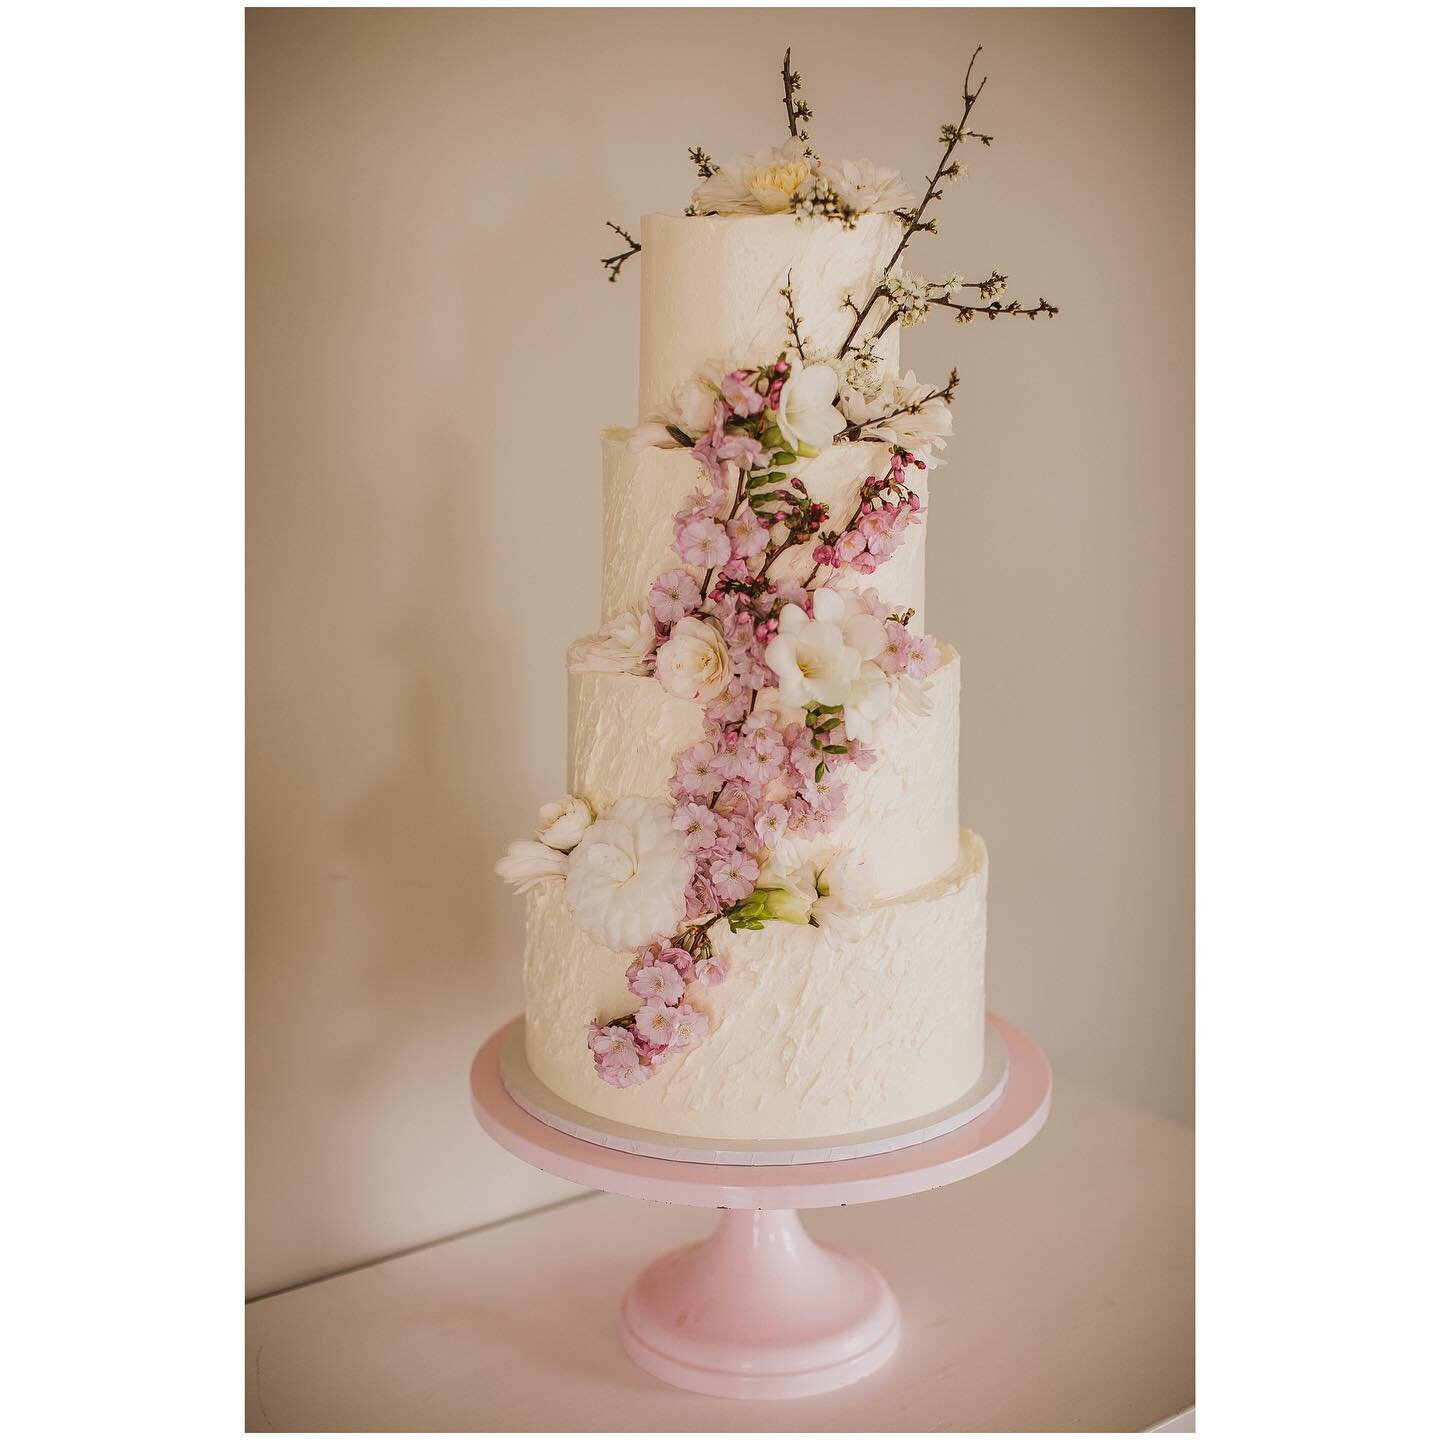 Anyone looking to hire cake stands? We have many soon to be added to our stock including this pink Melanie one.